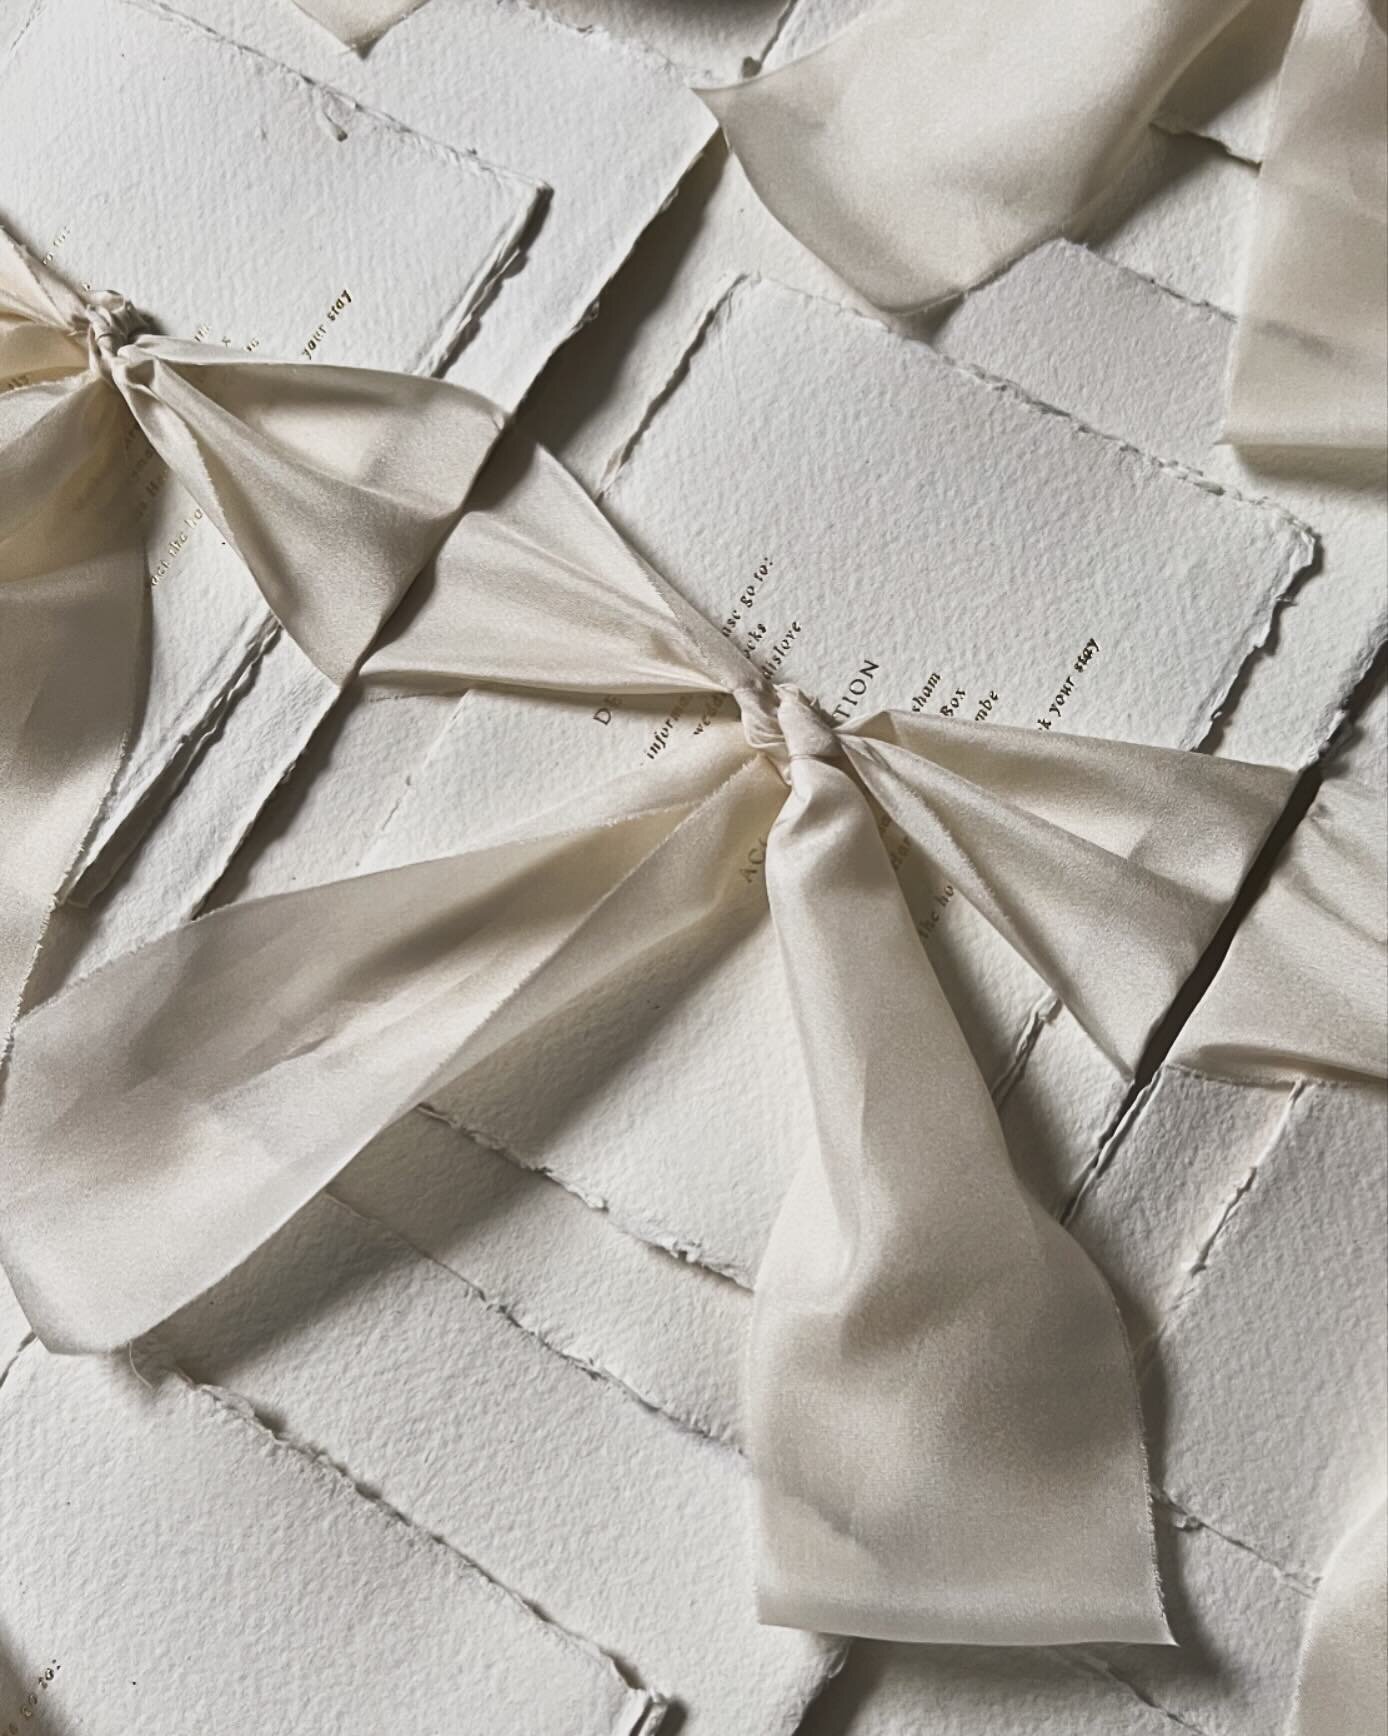 Handmade paper all tied up in silk ribbon
.
.
.
For R&amp;G&rsquo;s wedding @euridge_
#goldfoil #goldfoilinvitations #silkribbon #hotfoilstamping #bespokeweddingstationery #ukweddingstationery